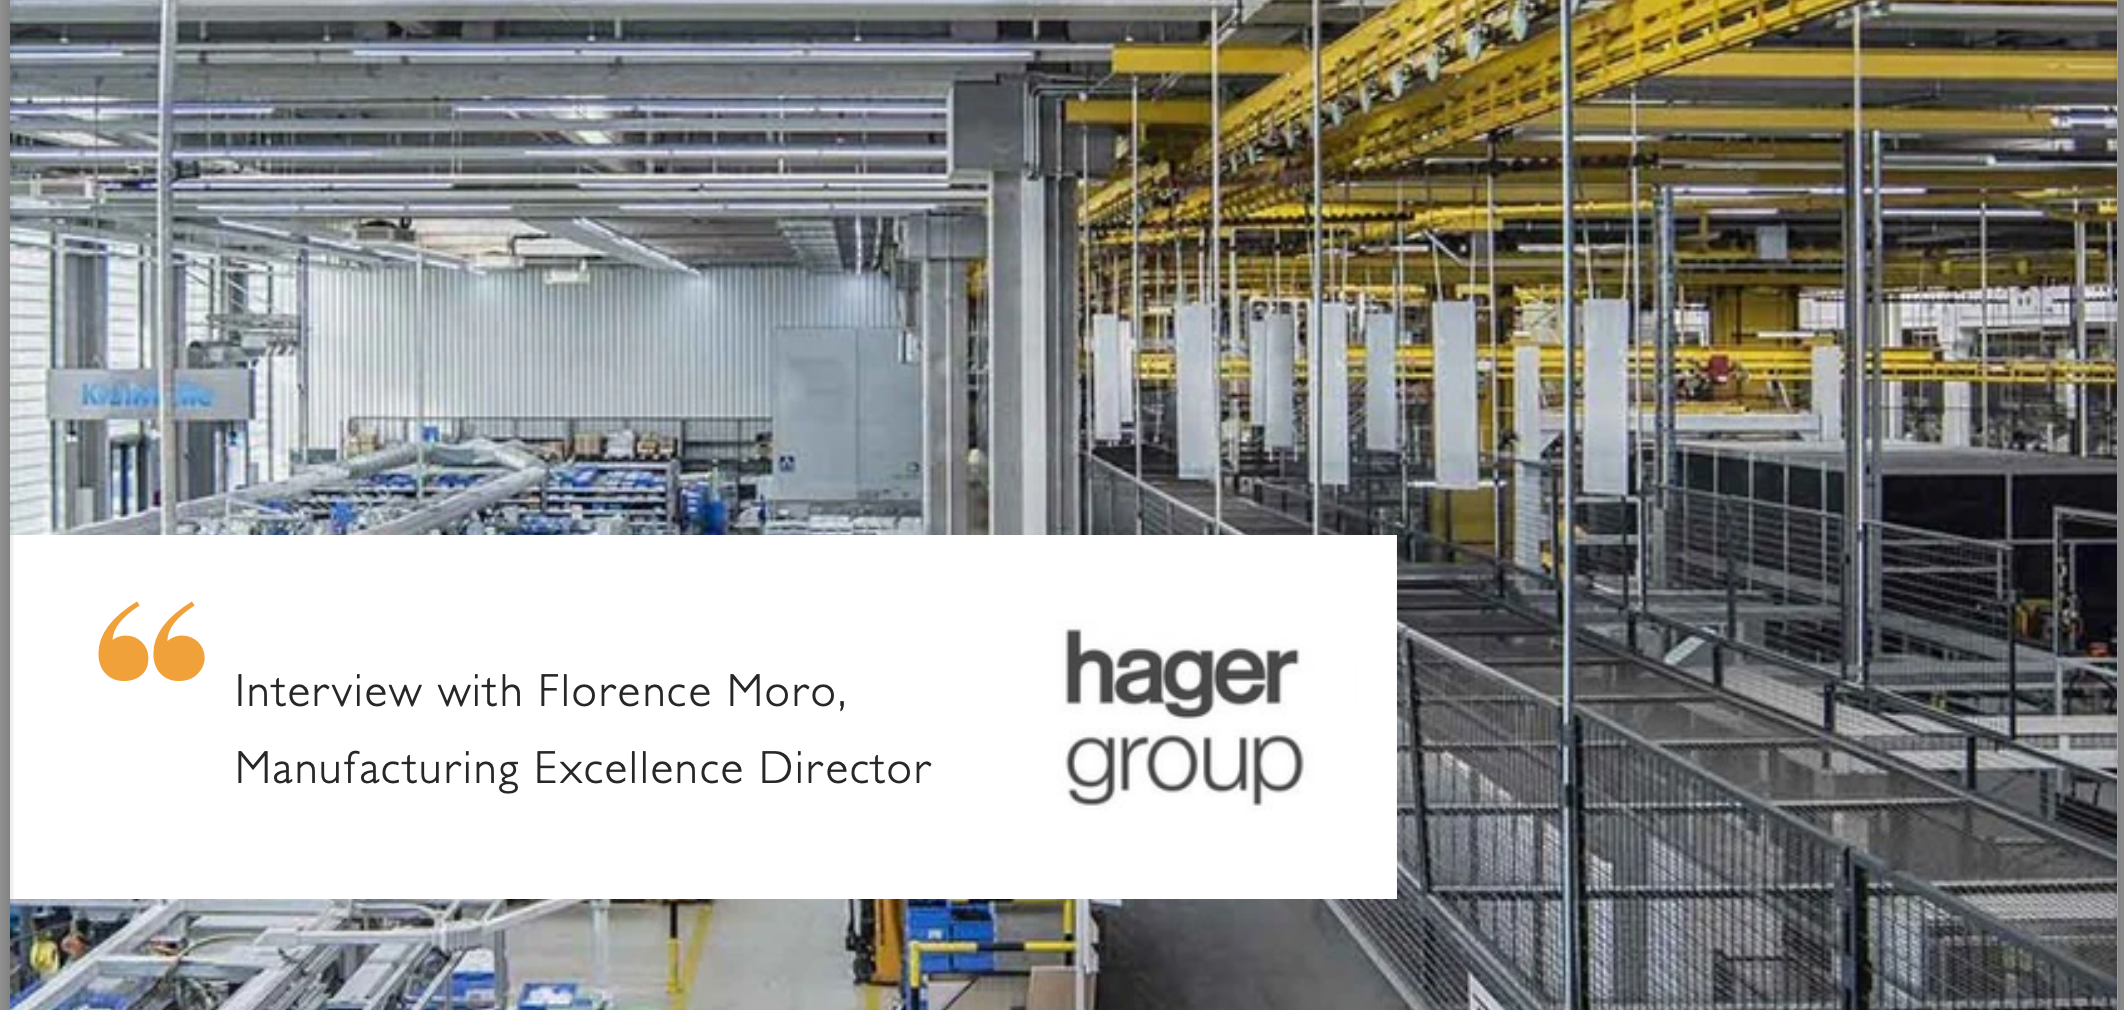 Interview of Florence Moro, head of Industrial Excellence at Hager Group and leading the decarbonisation of the Group Manufacturing